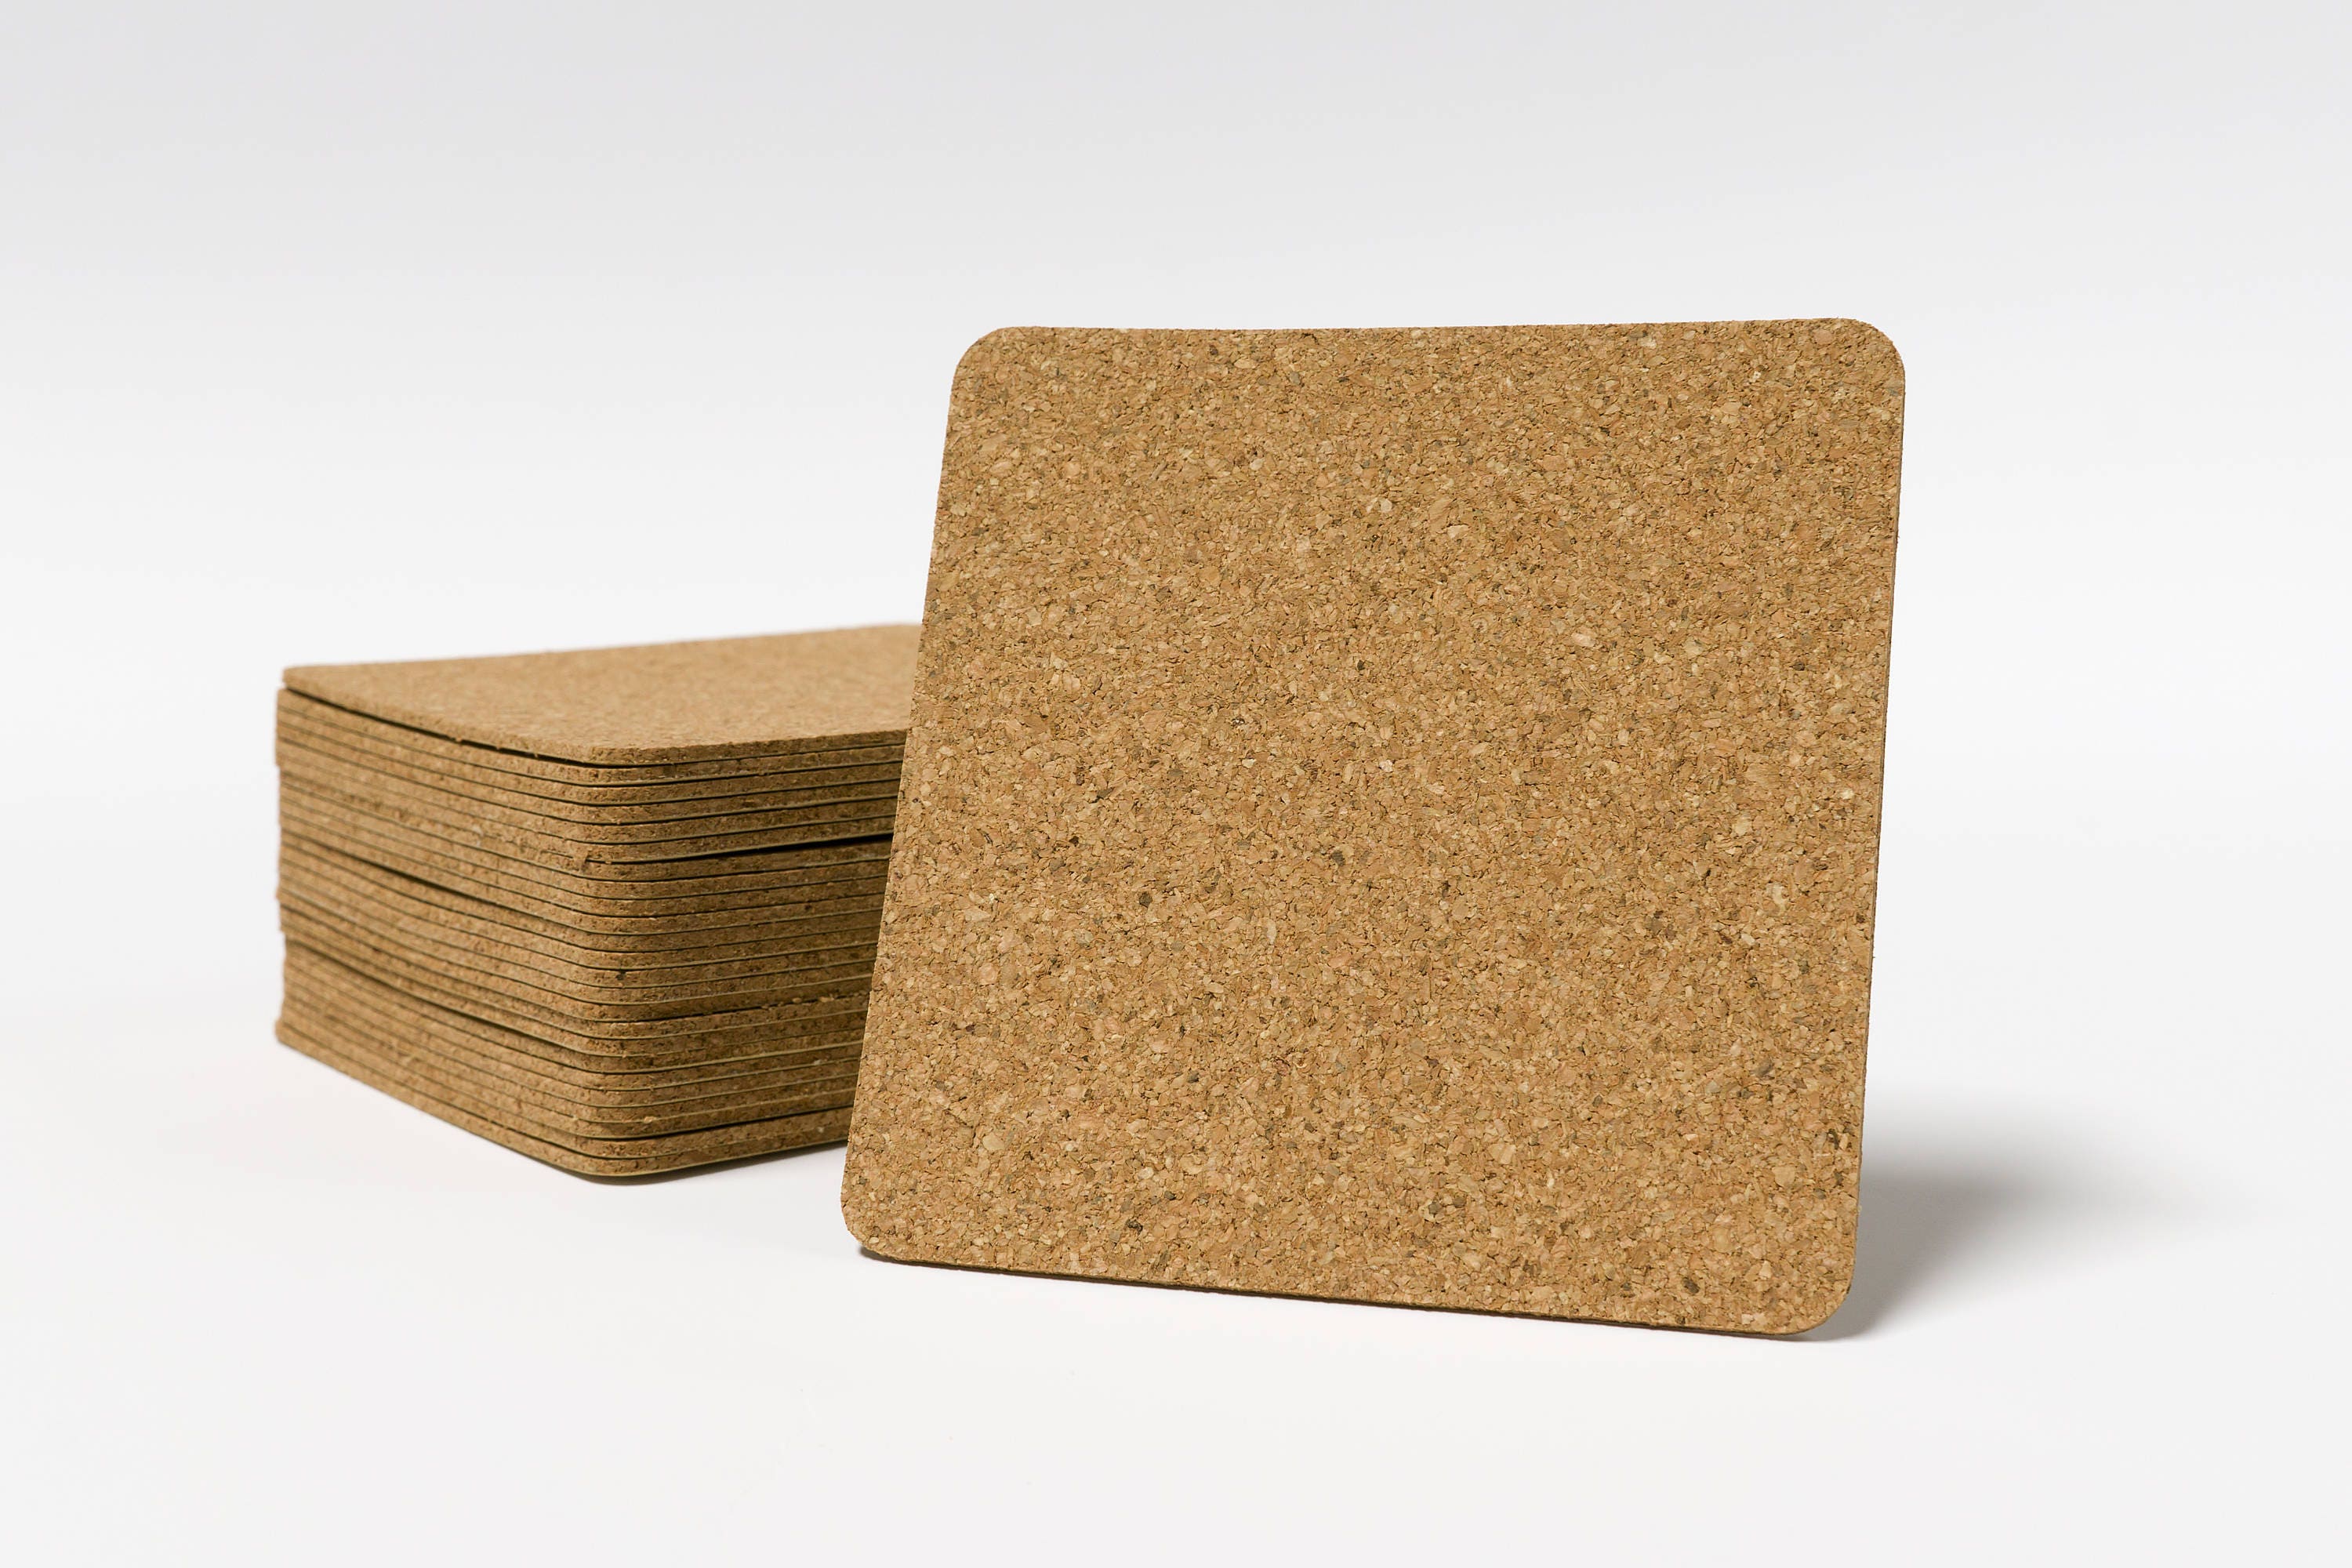 5 Self Stick Cork Backing 3.75 X 3.75 With Rounded 